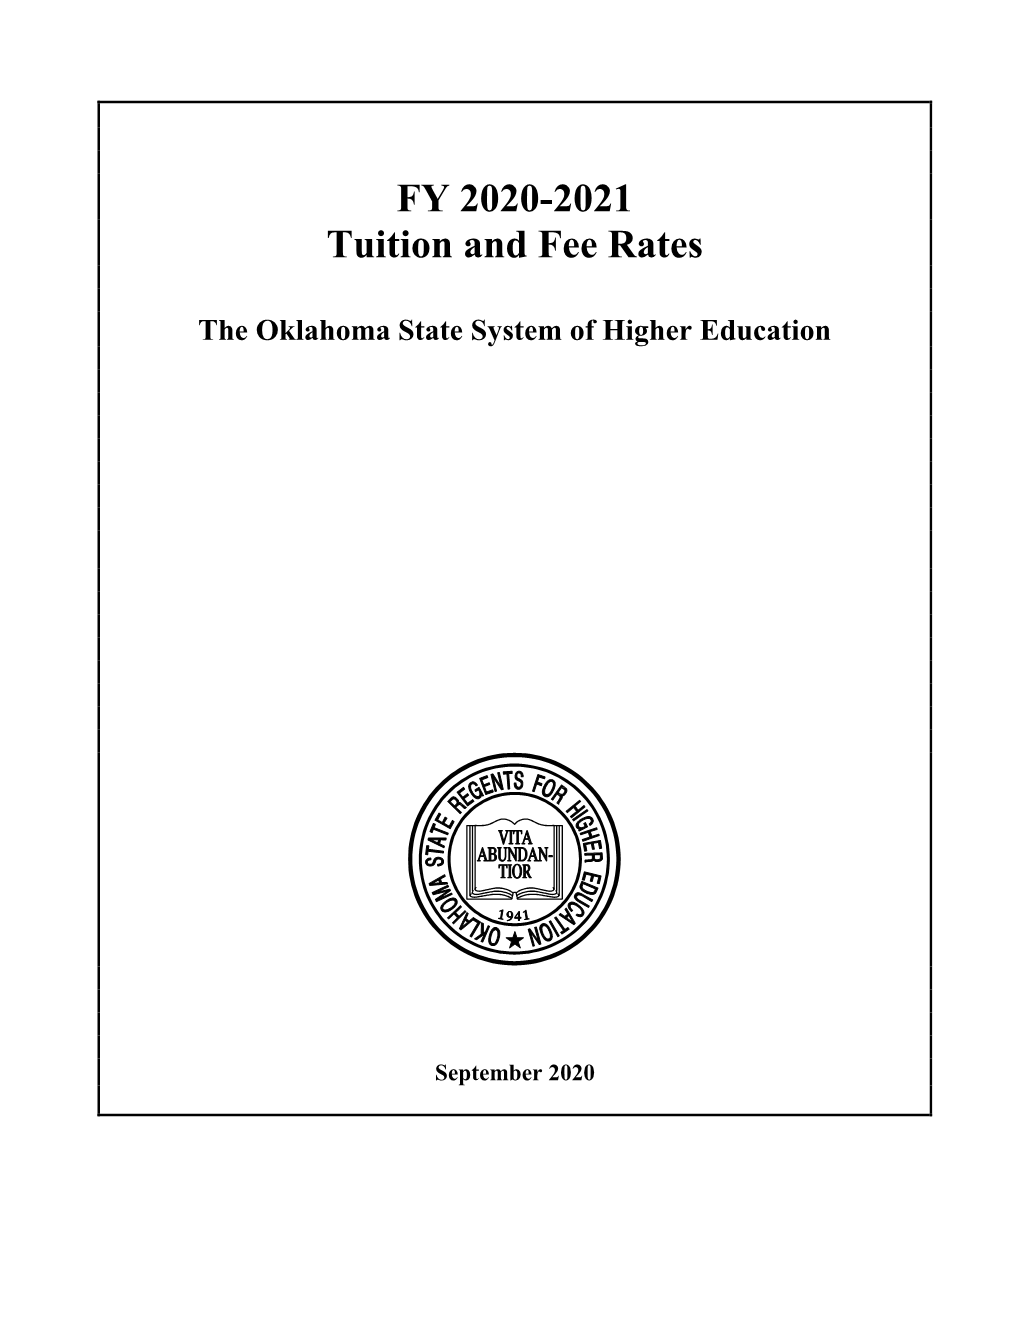 FY 2020-2021 Tuition and Fee Rates